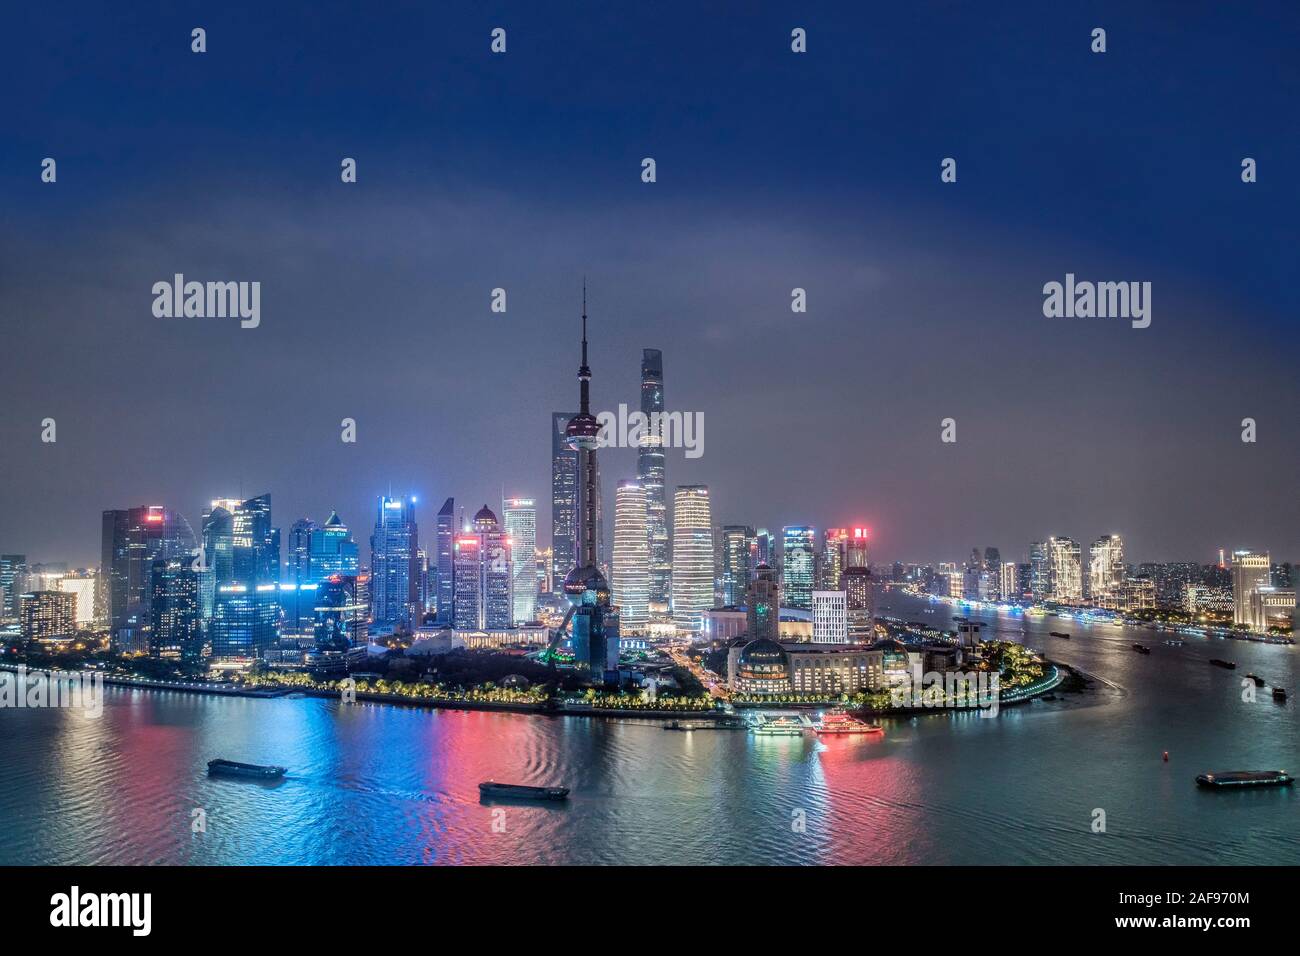 Pudong district and the skyline of Shanghai, China with the Huangpu river and tall skyscrapers Stock Photo